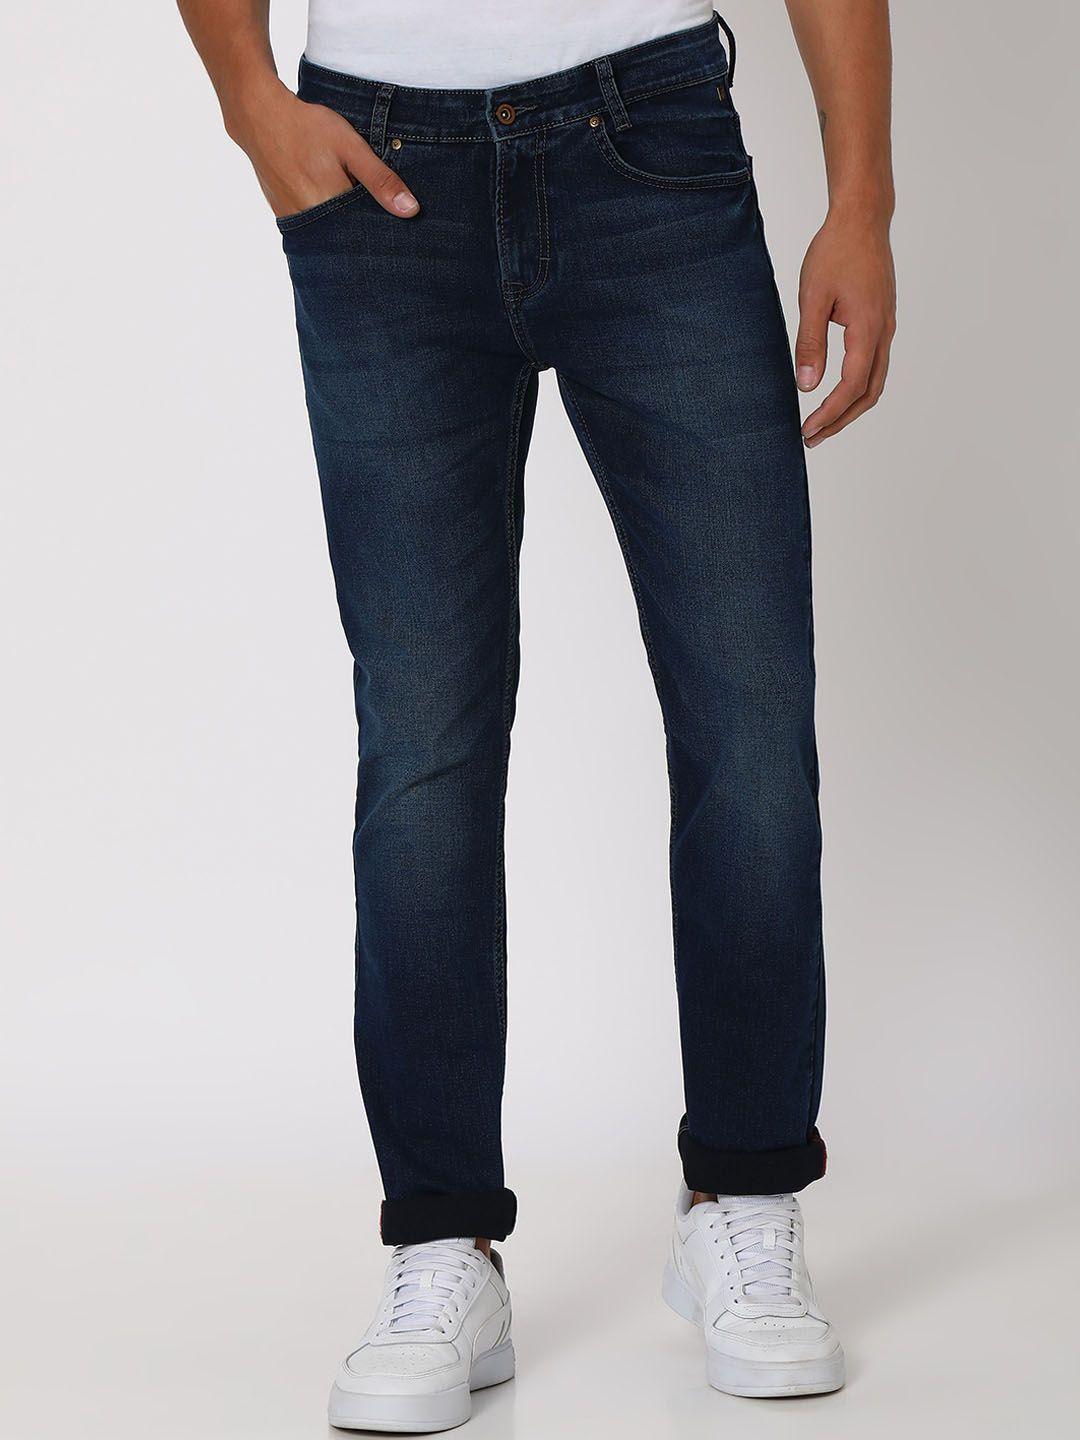 mufti-men-skinny-fit-mid-rise-light-fade-clean-look-stretchable-jeans